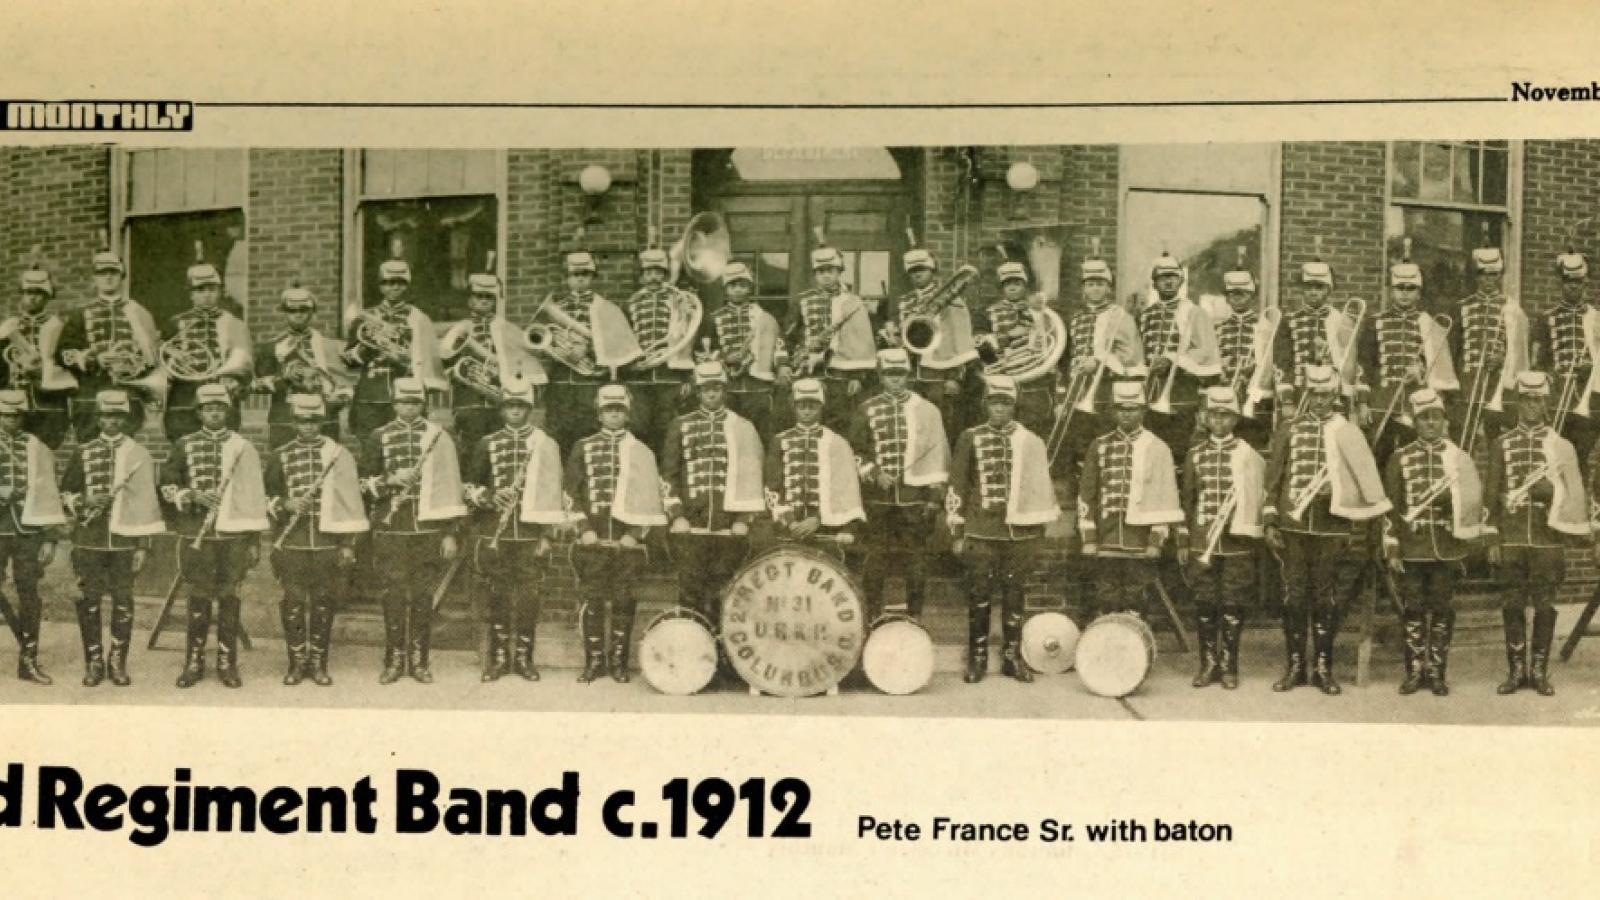 The Second Regiment Marching Band. Columbus, Ohio, 1912.